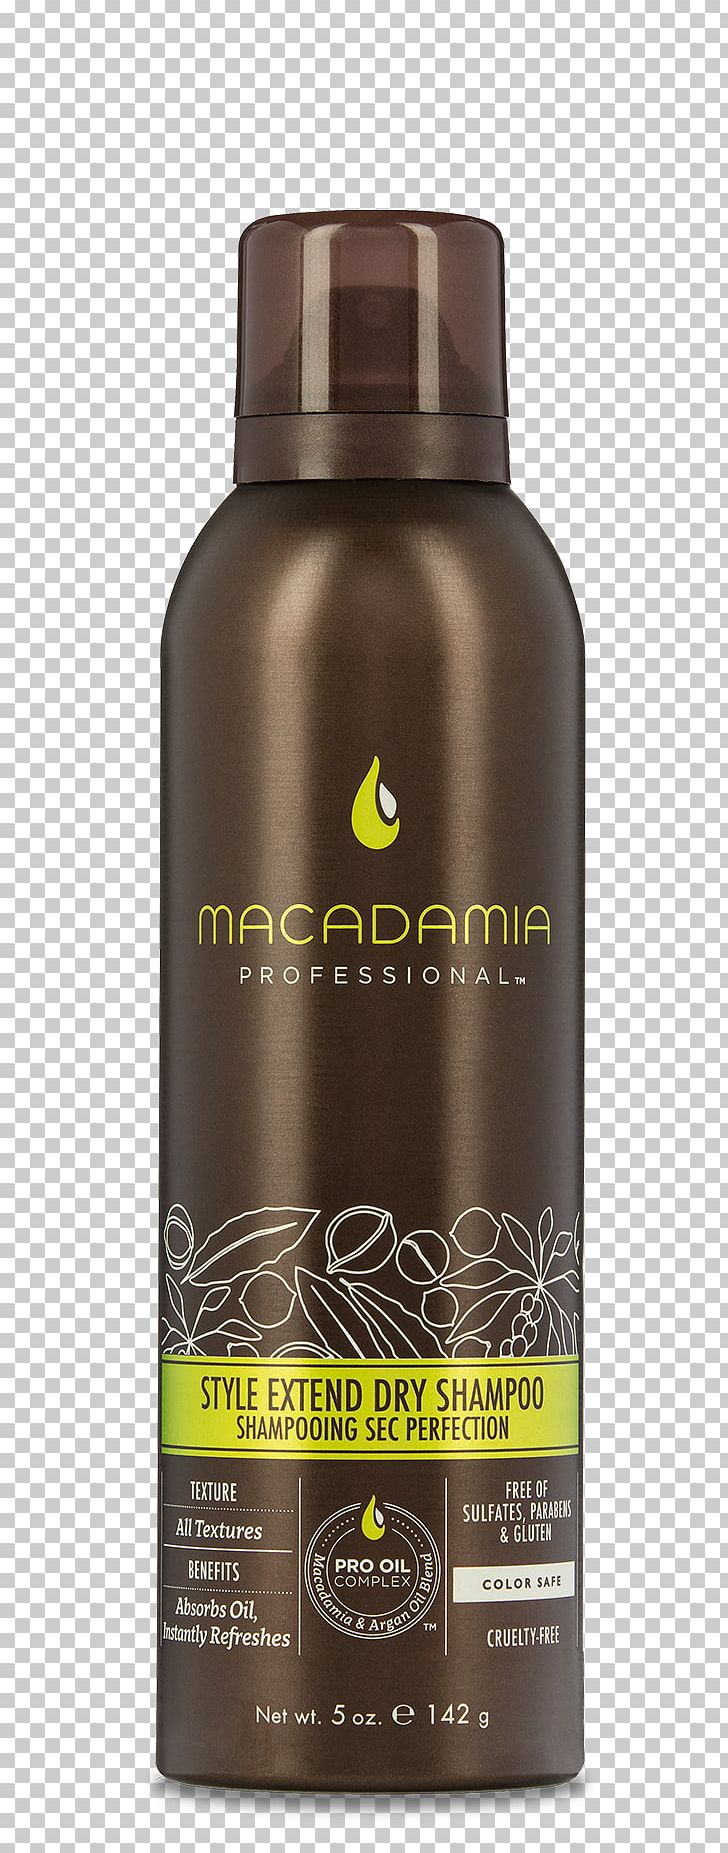 Macadamia Oil Hair Spray Shampoo PNG, Clipart, Capelli, Dry Shampoo, Extend, Hair, Hair Care Free PNG Download